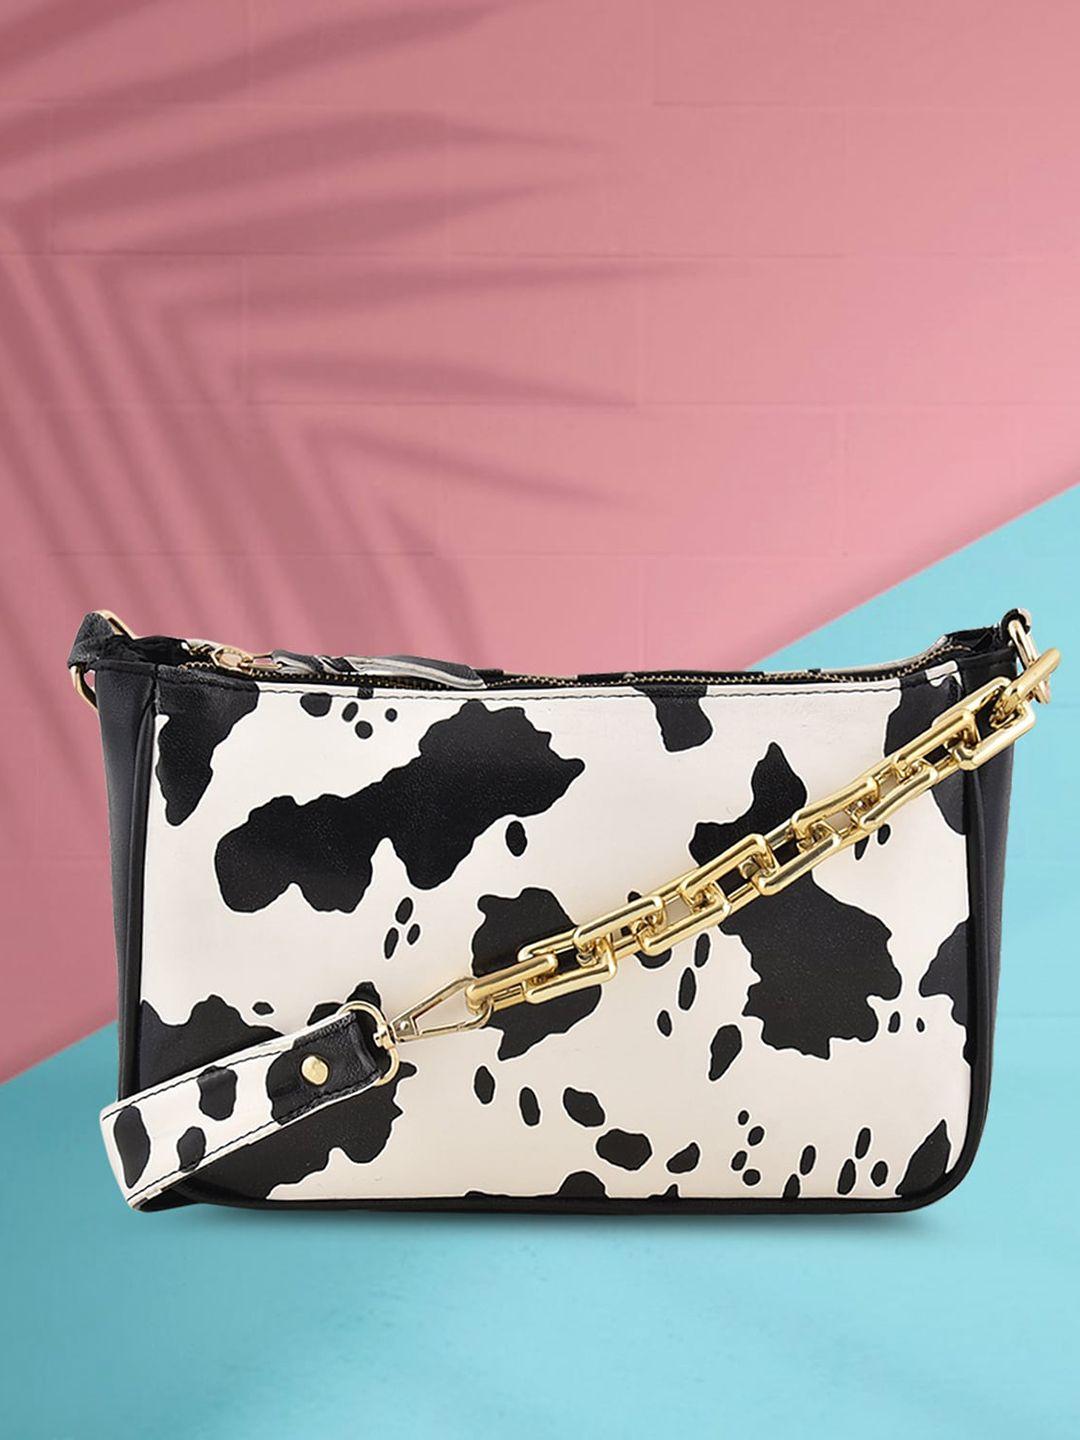 dressberry off-white & black cow printed structured handheld bag